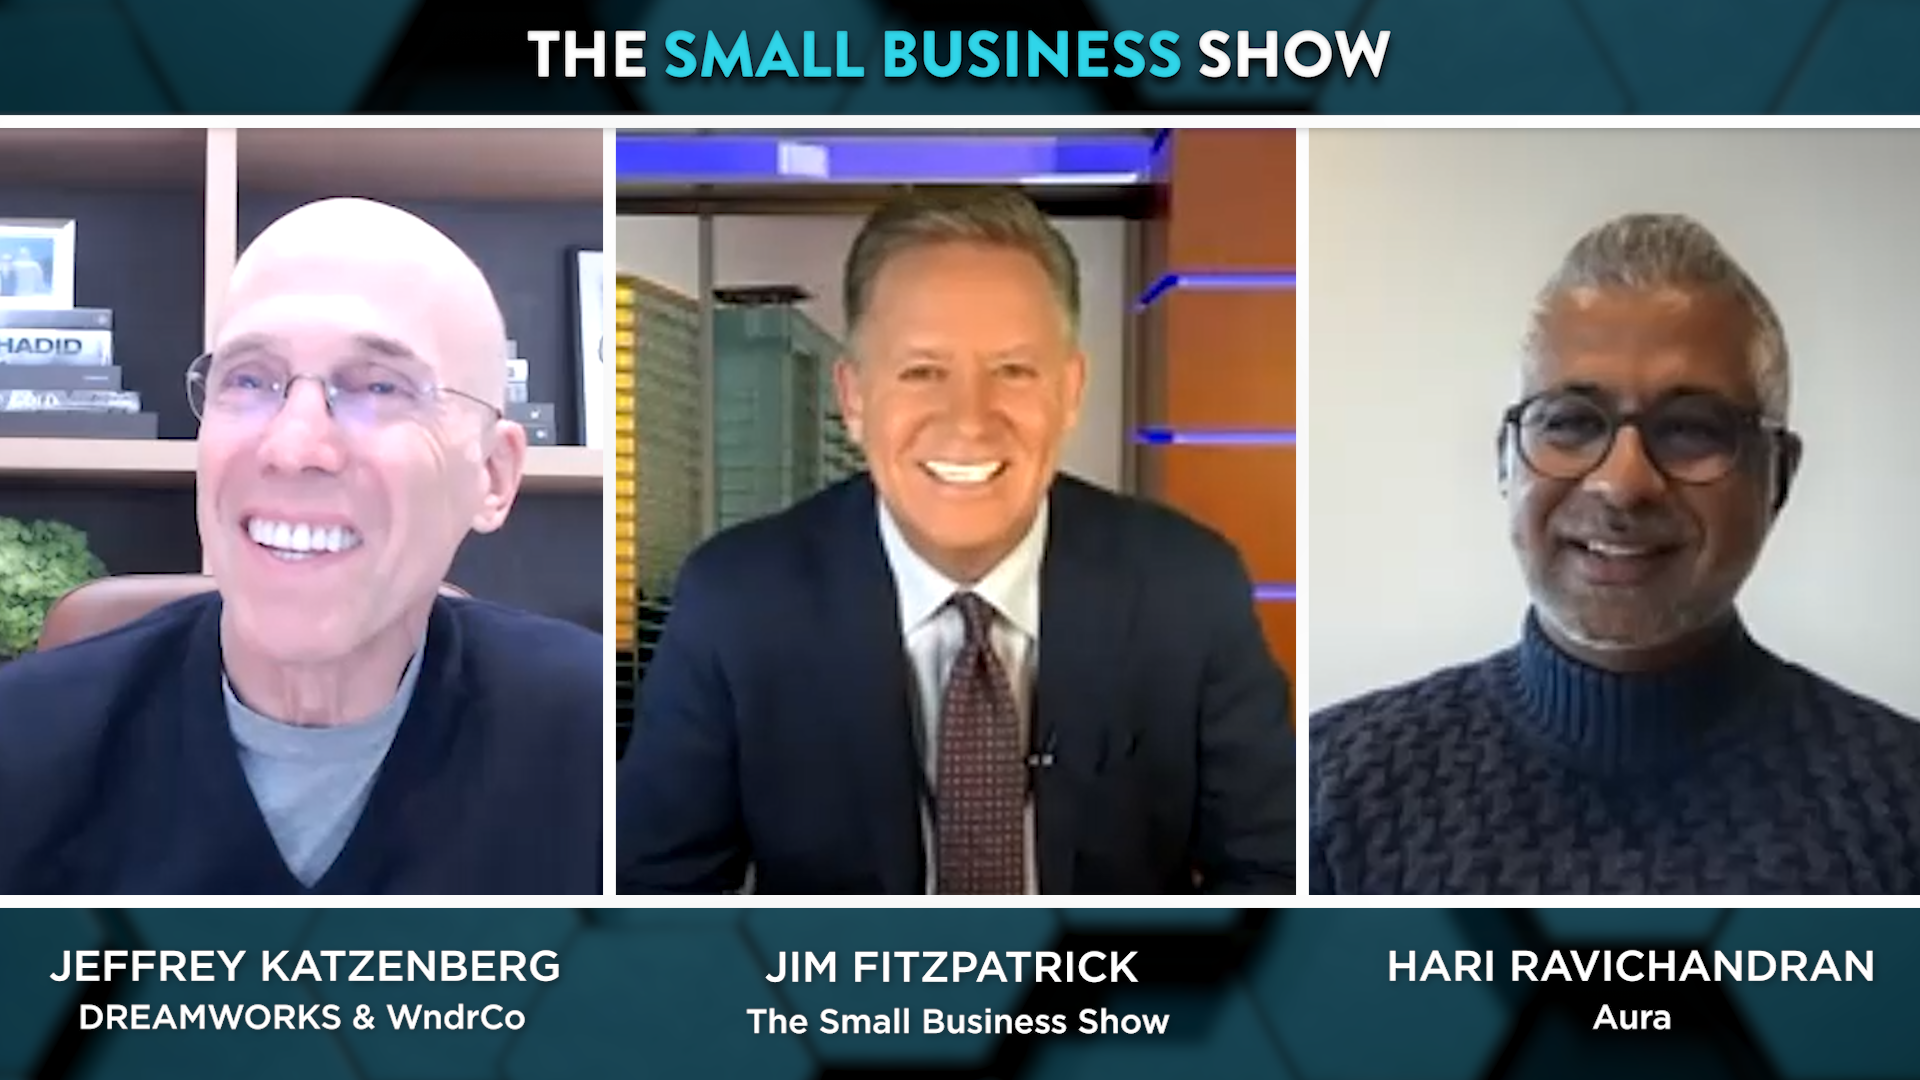 Entrepreneurs Jeffrey Katzenberg and Hari Ravichandran discuss how digital security is more important than ever for small businesses.